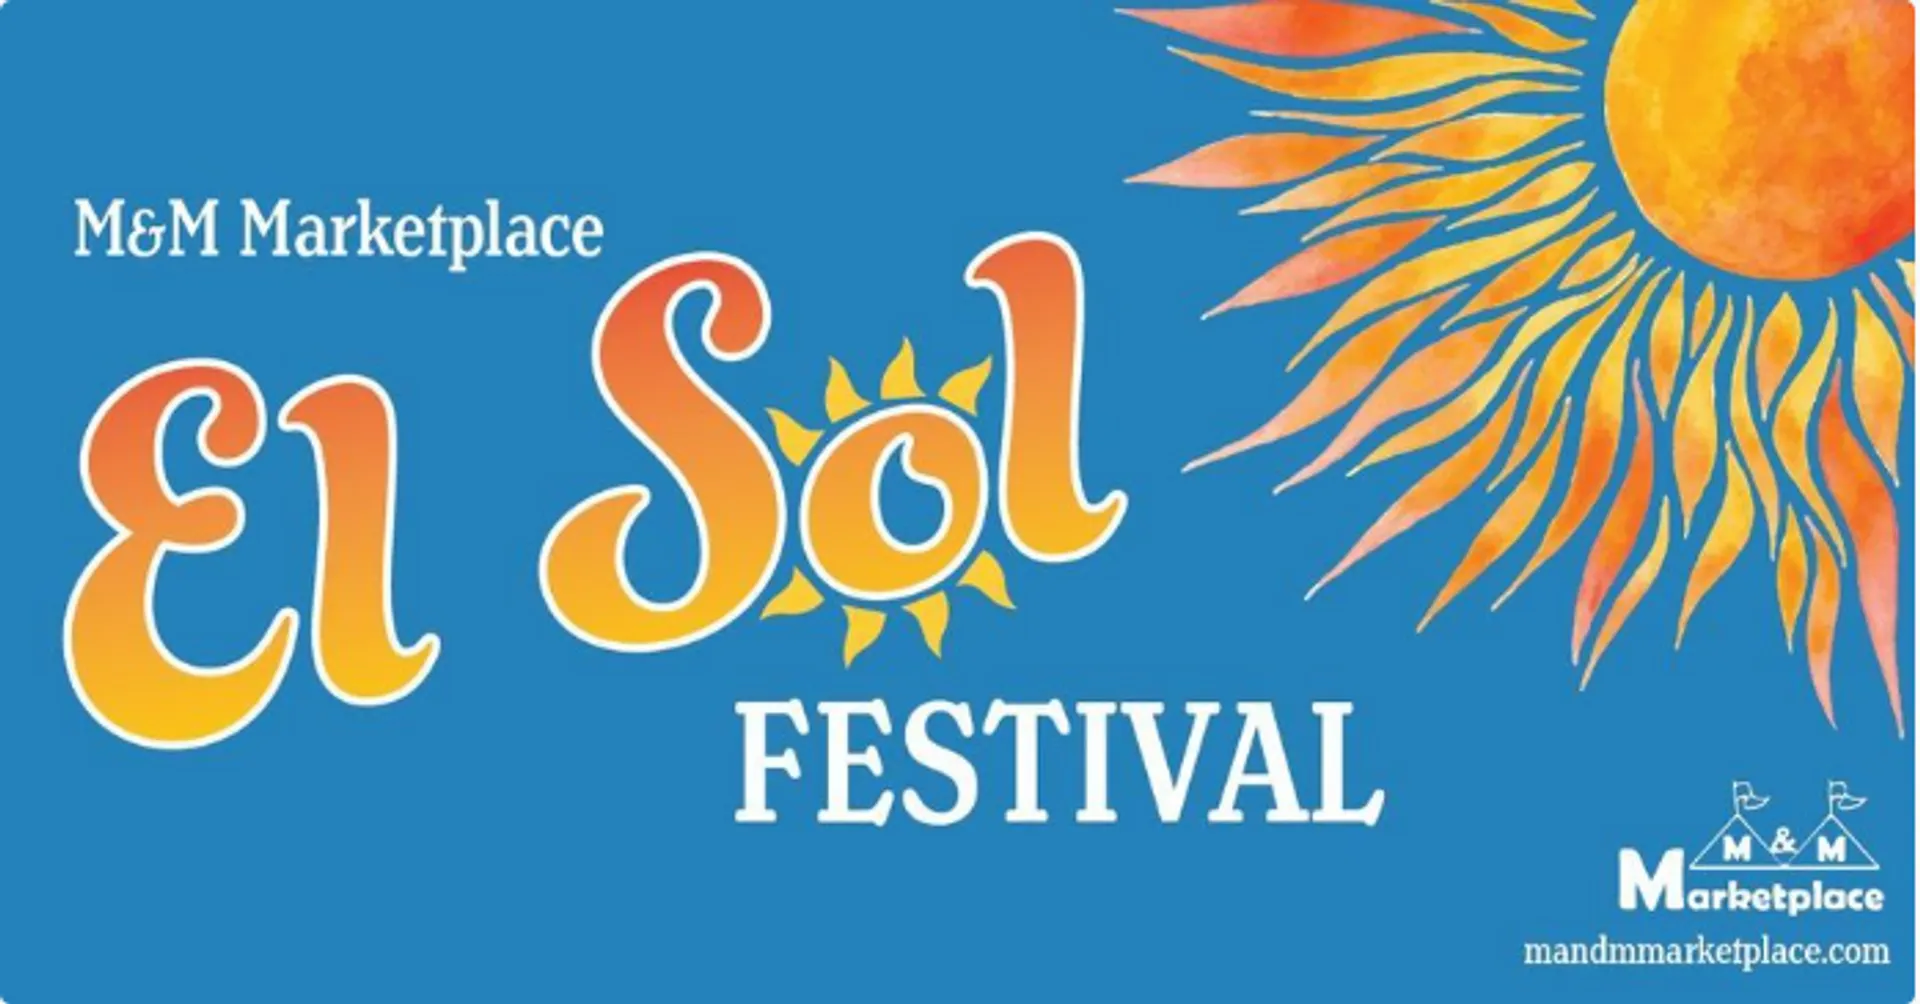 El Sol Festival is coming to Hillsboro every Saturday from 12-2 at M&M  Marketplace with live music, dance, and food from around the world!